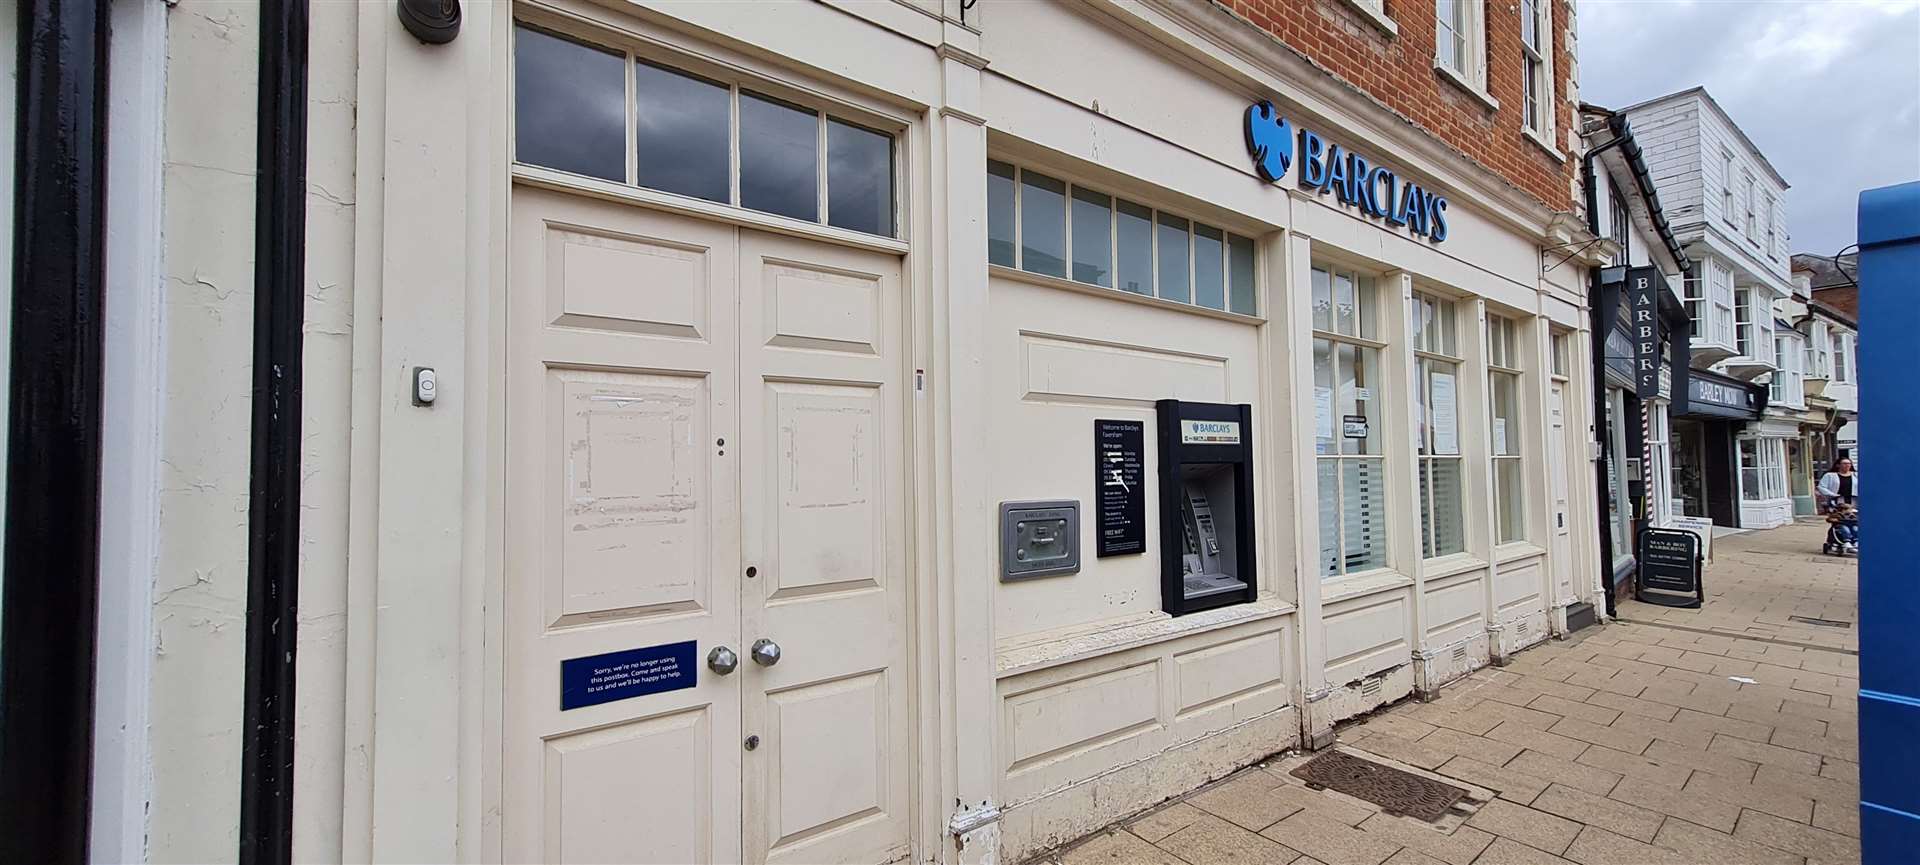 Barclays in Court Street, Faversham, is closing for good